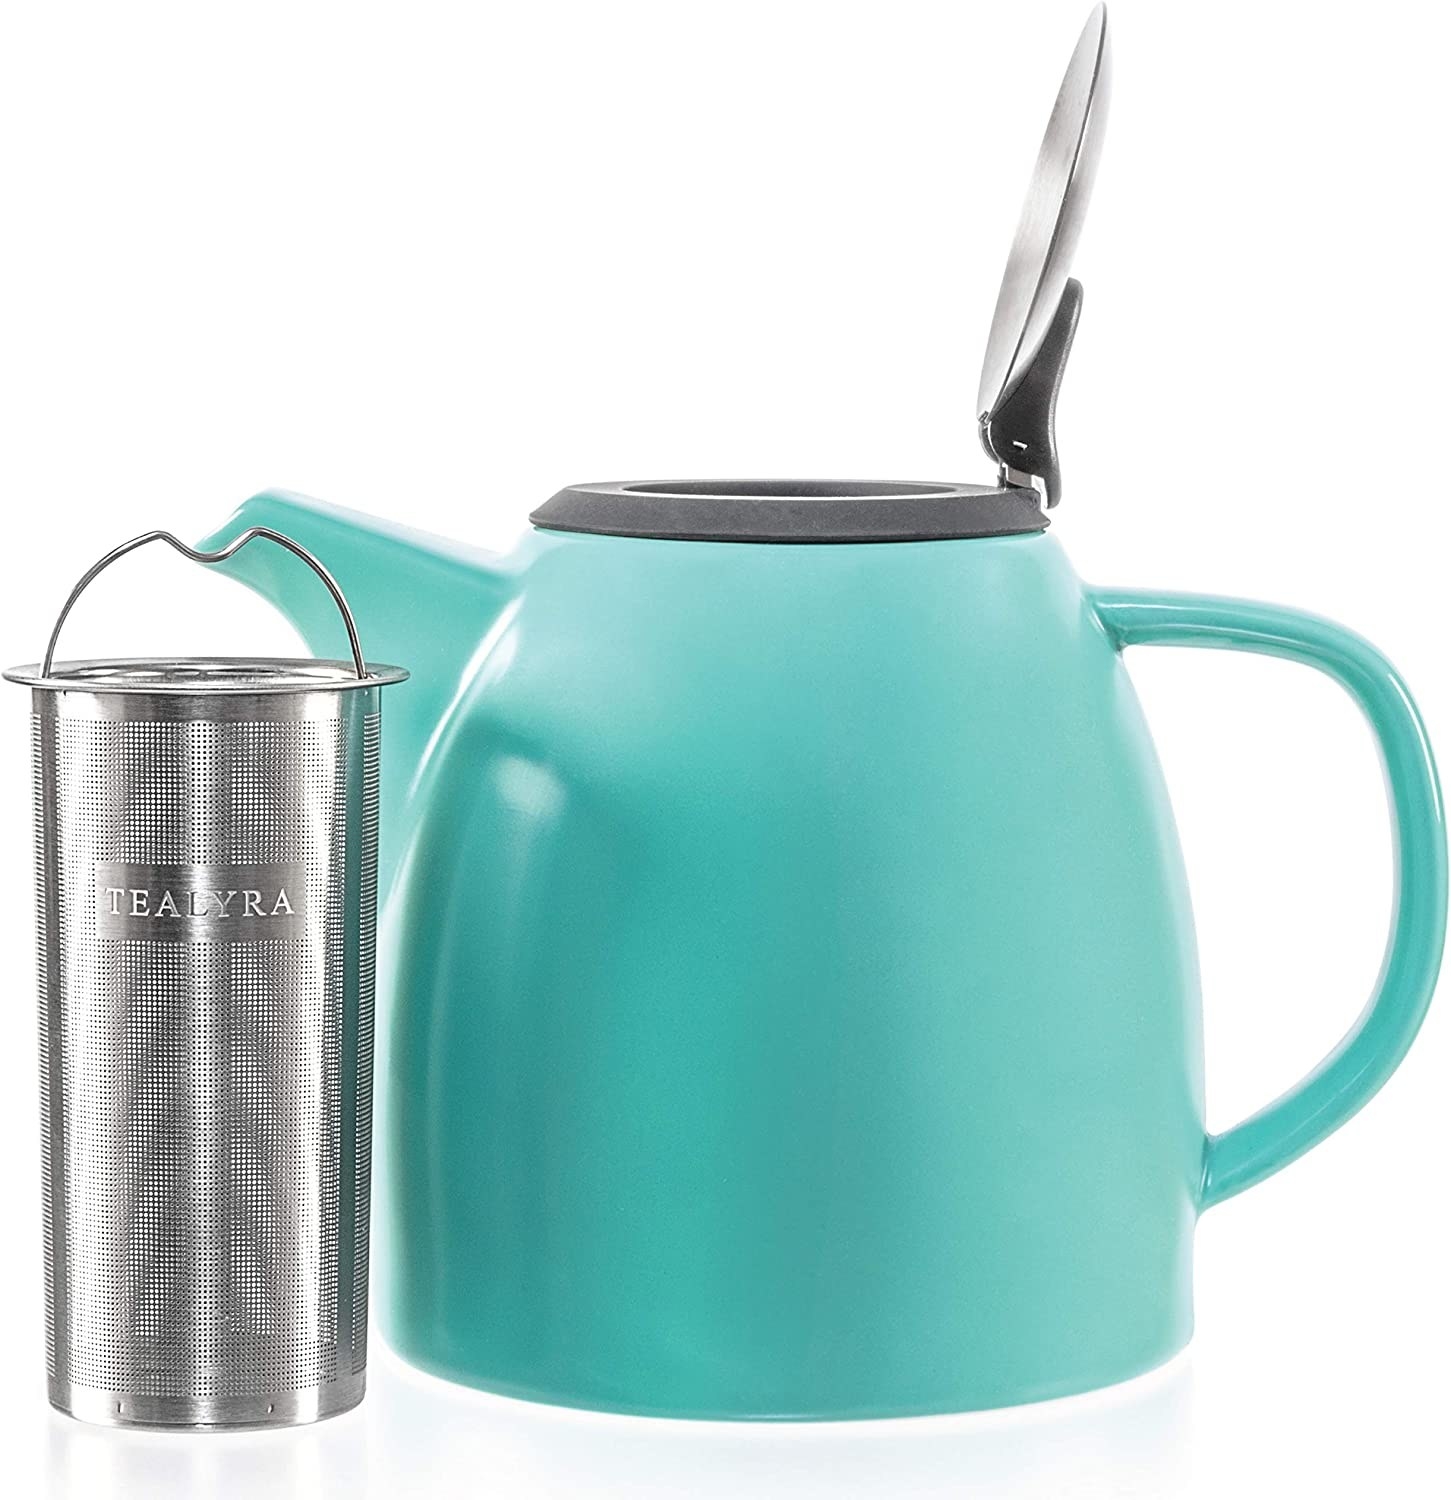 a cute tea pot and a long mesh tea infuser against a blank background